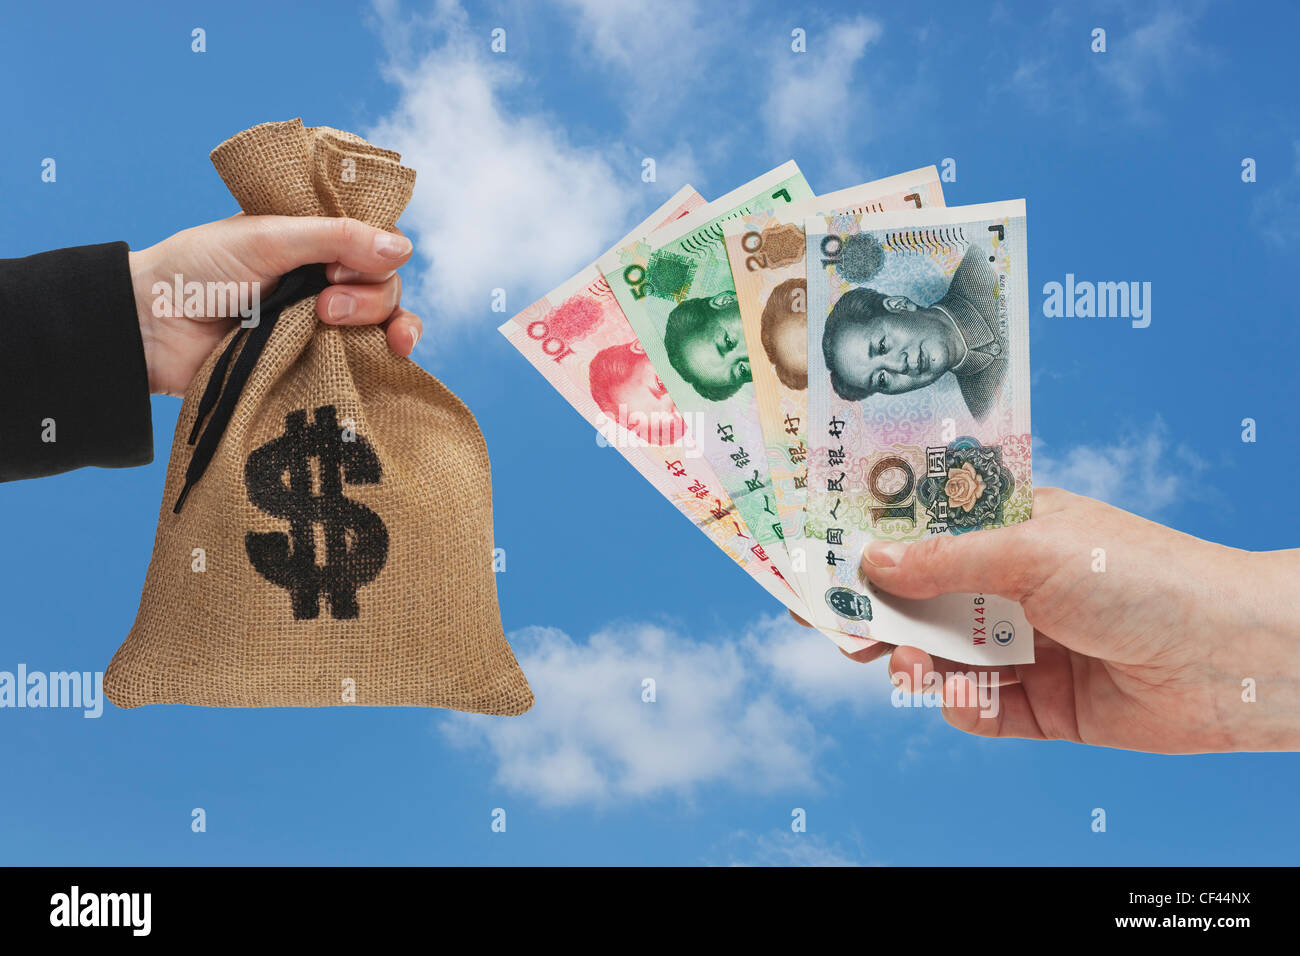 Diverse Chinese Yuan bills are held in the hand. At the other side a money bag with a U.S. Dollar currency sign held in the hand Stock Photo